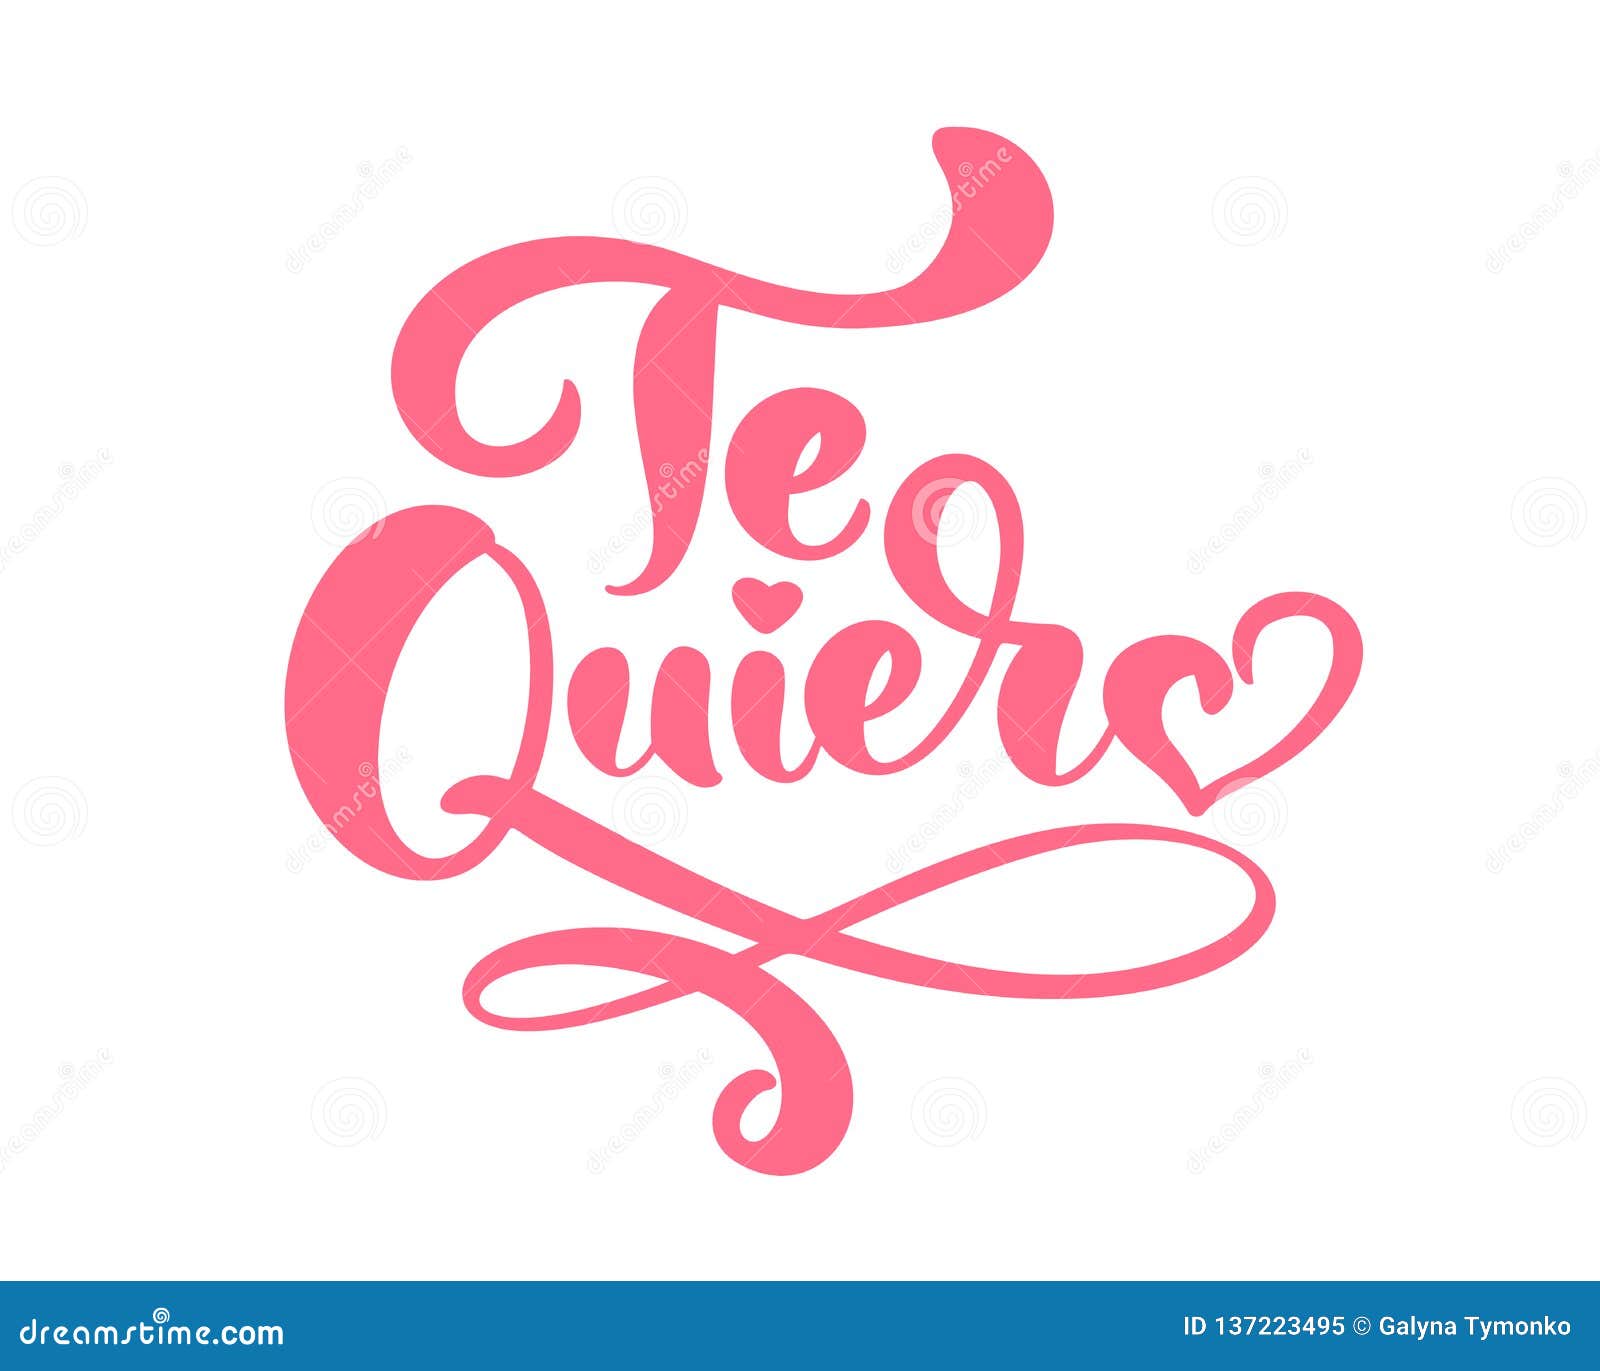 calligraphy phrase te quiero on spanish - i love you.  valentines day hand drawn lettering. heart holiday sketch doodle